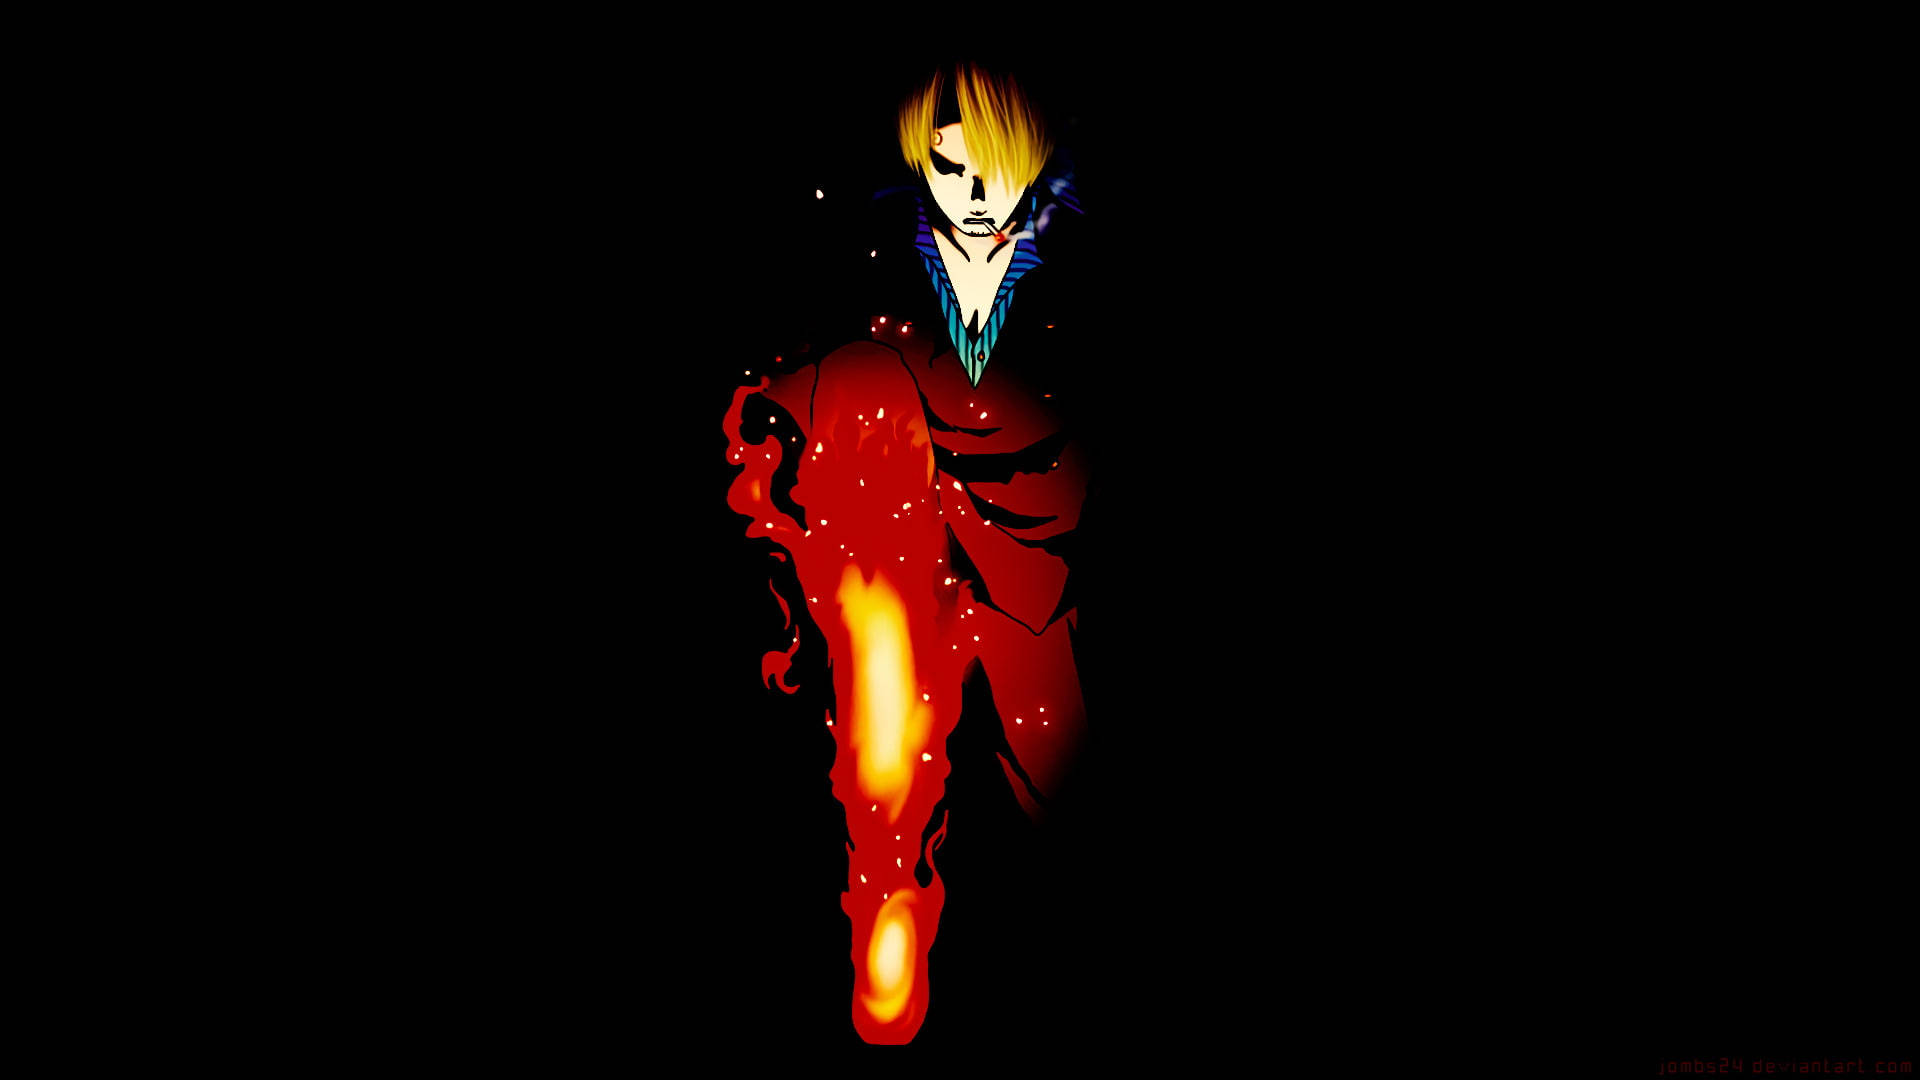 Sanji delivers a powerful Devil Kick in the darkness Wallpaper